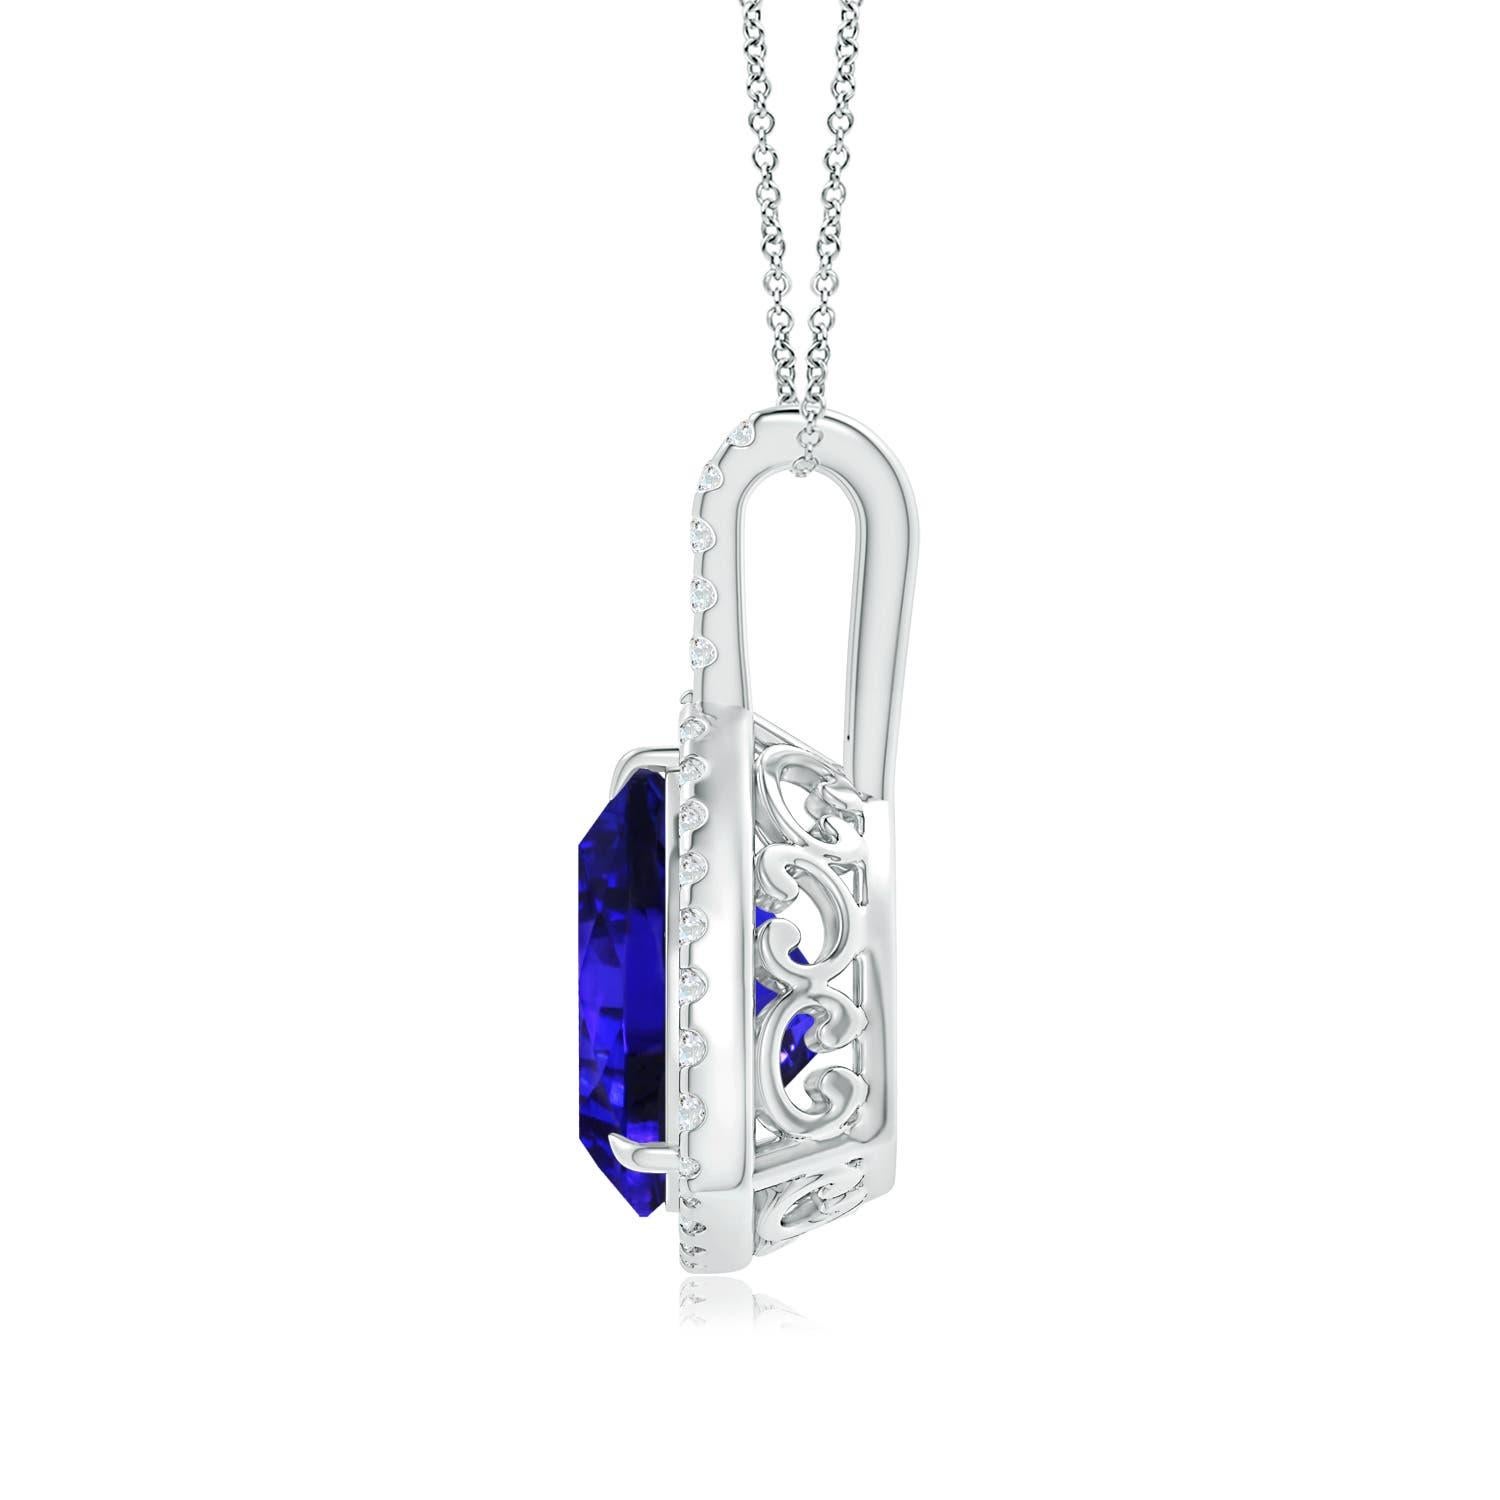 Designed with a diamond-studded bale and elegant scrollwork on the metal, this trillion tanzanite halo pendant in platinum looks simple yet enigmatic. The brilliant u prong diamonds enhance the bluish-purple hue of the GIA certified